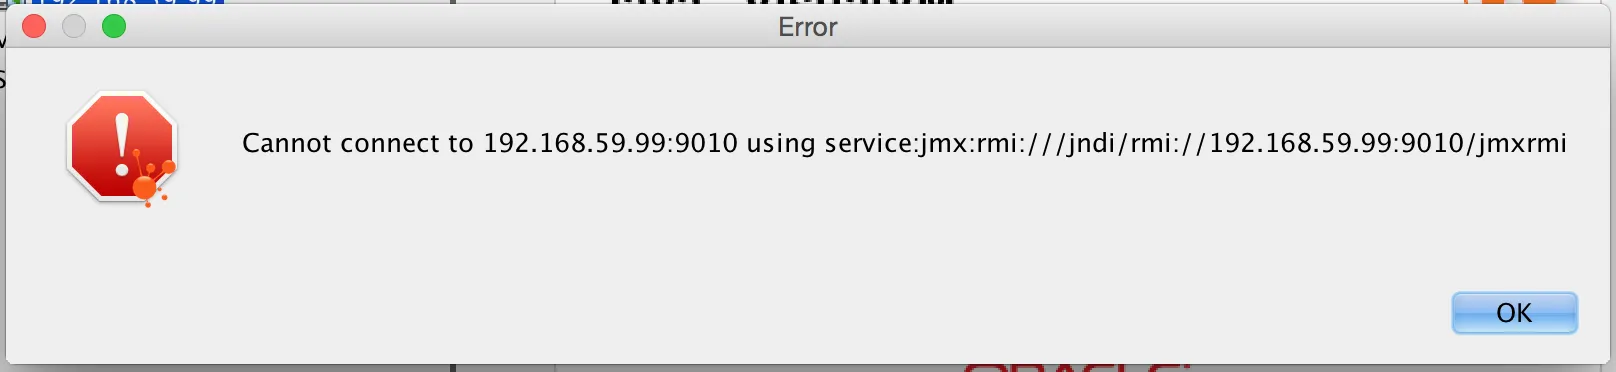 Error Message given by jvisualvm